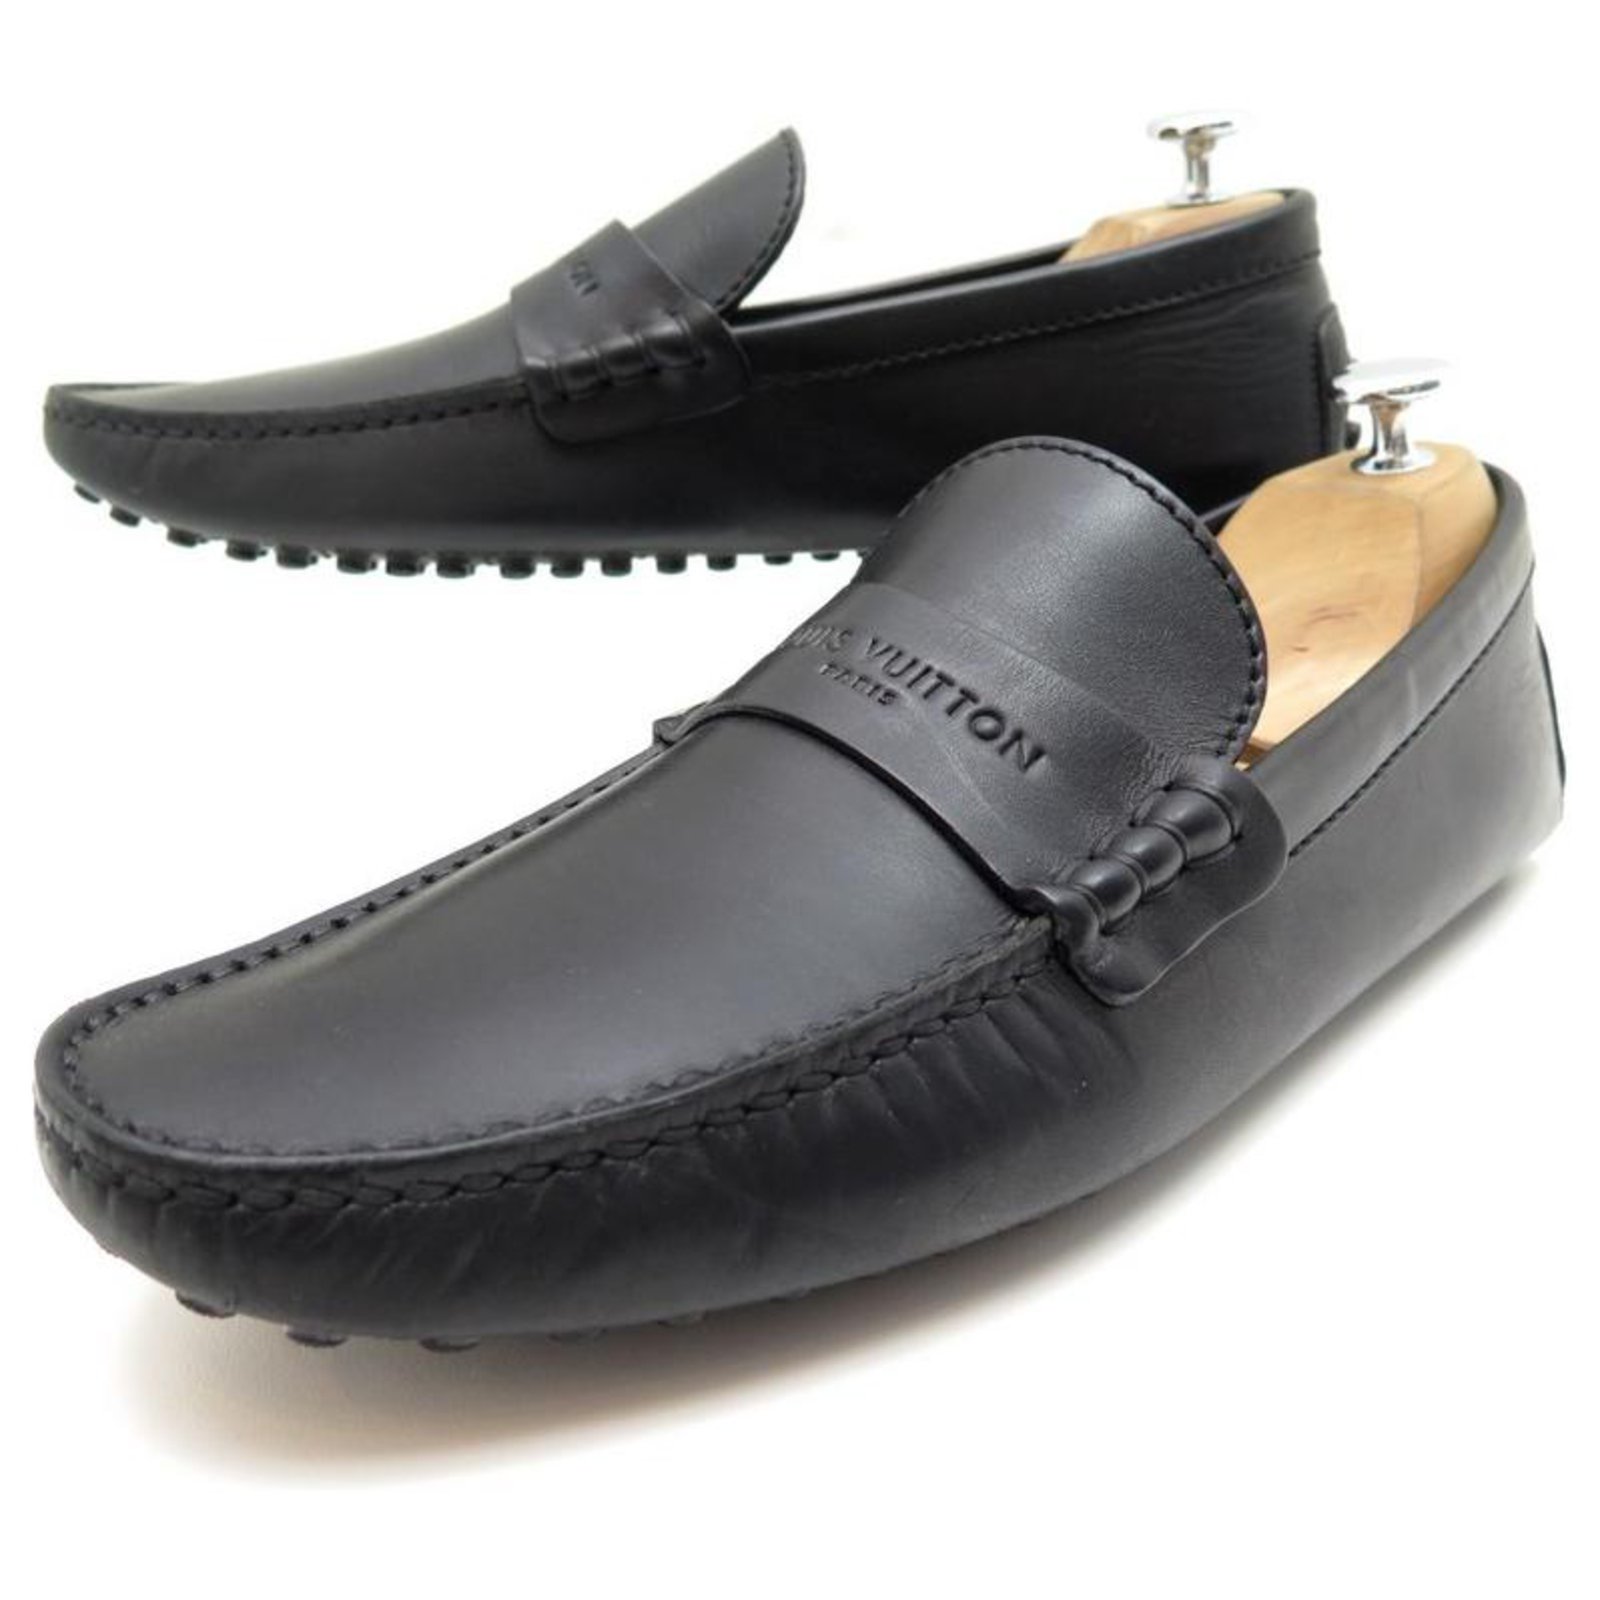 NEW LOUIS VUITTON LOAFERS STARTER 7 41.5 BLACK LEATHER SHOES